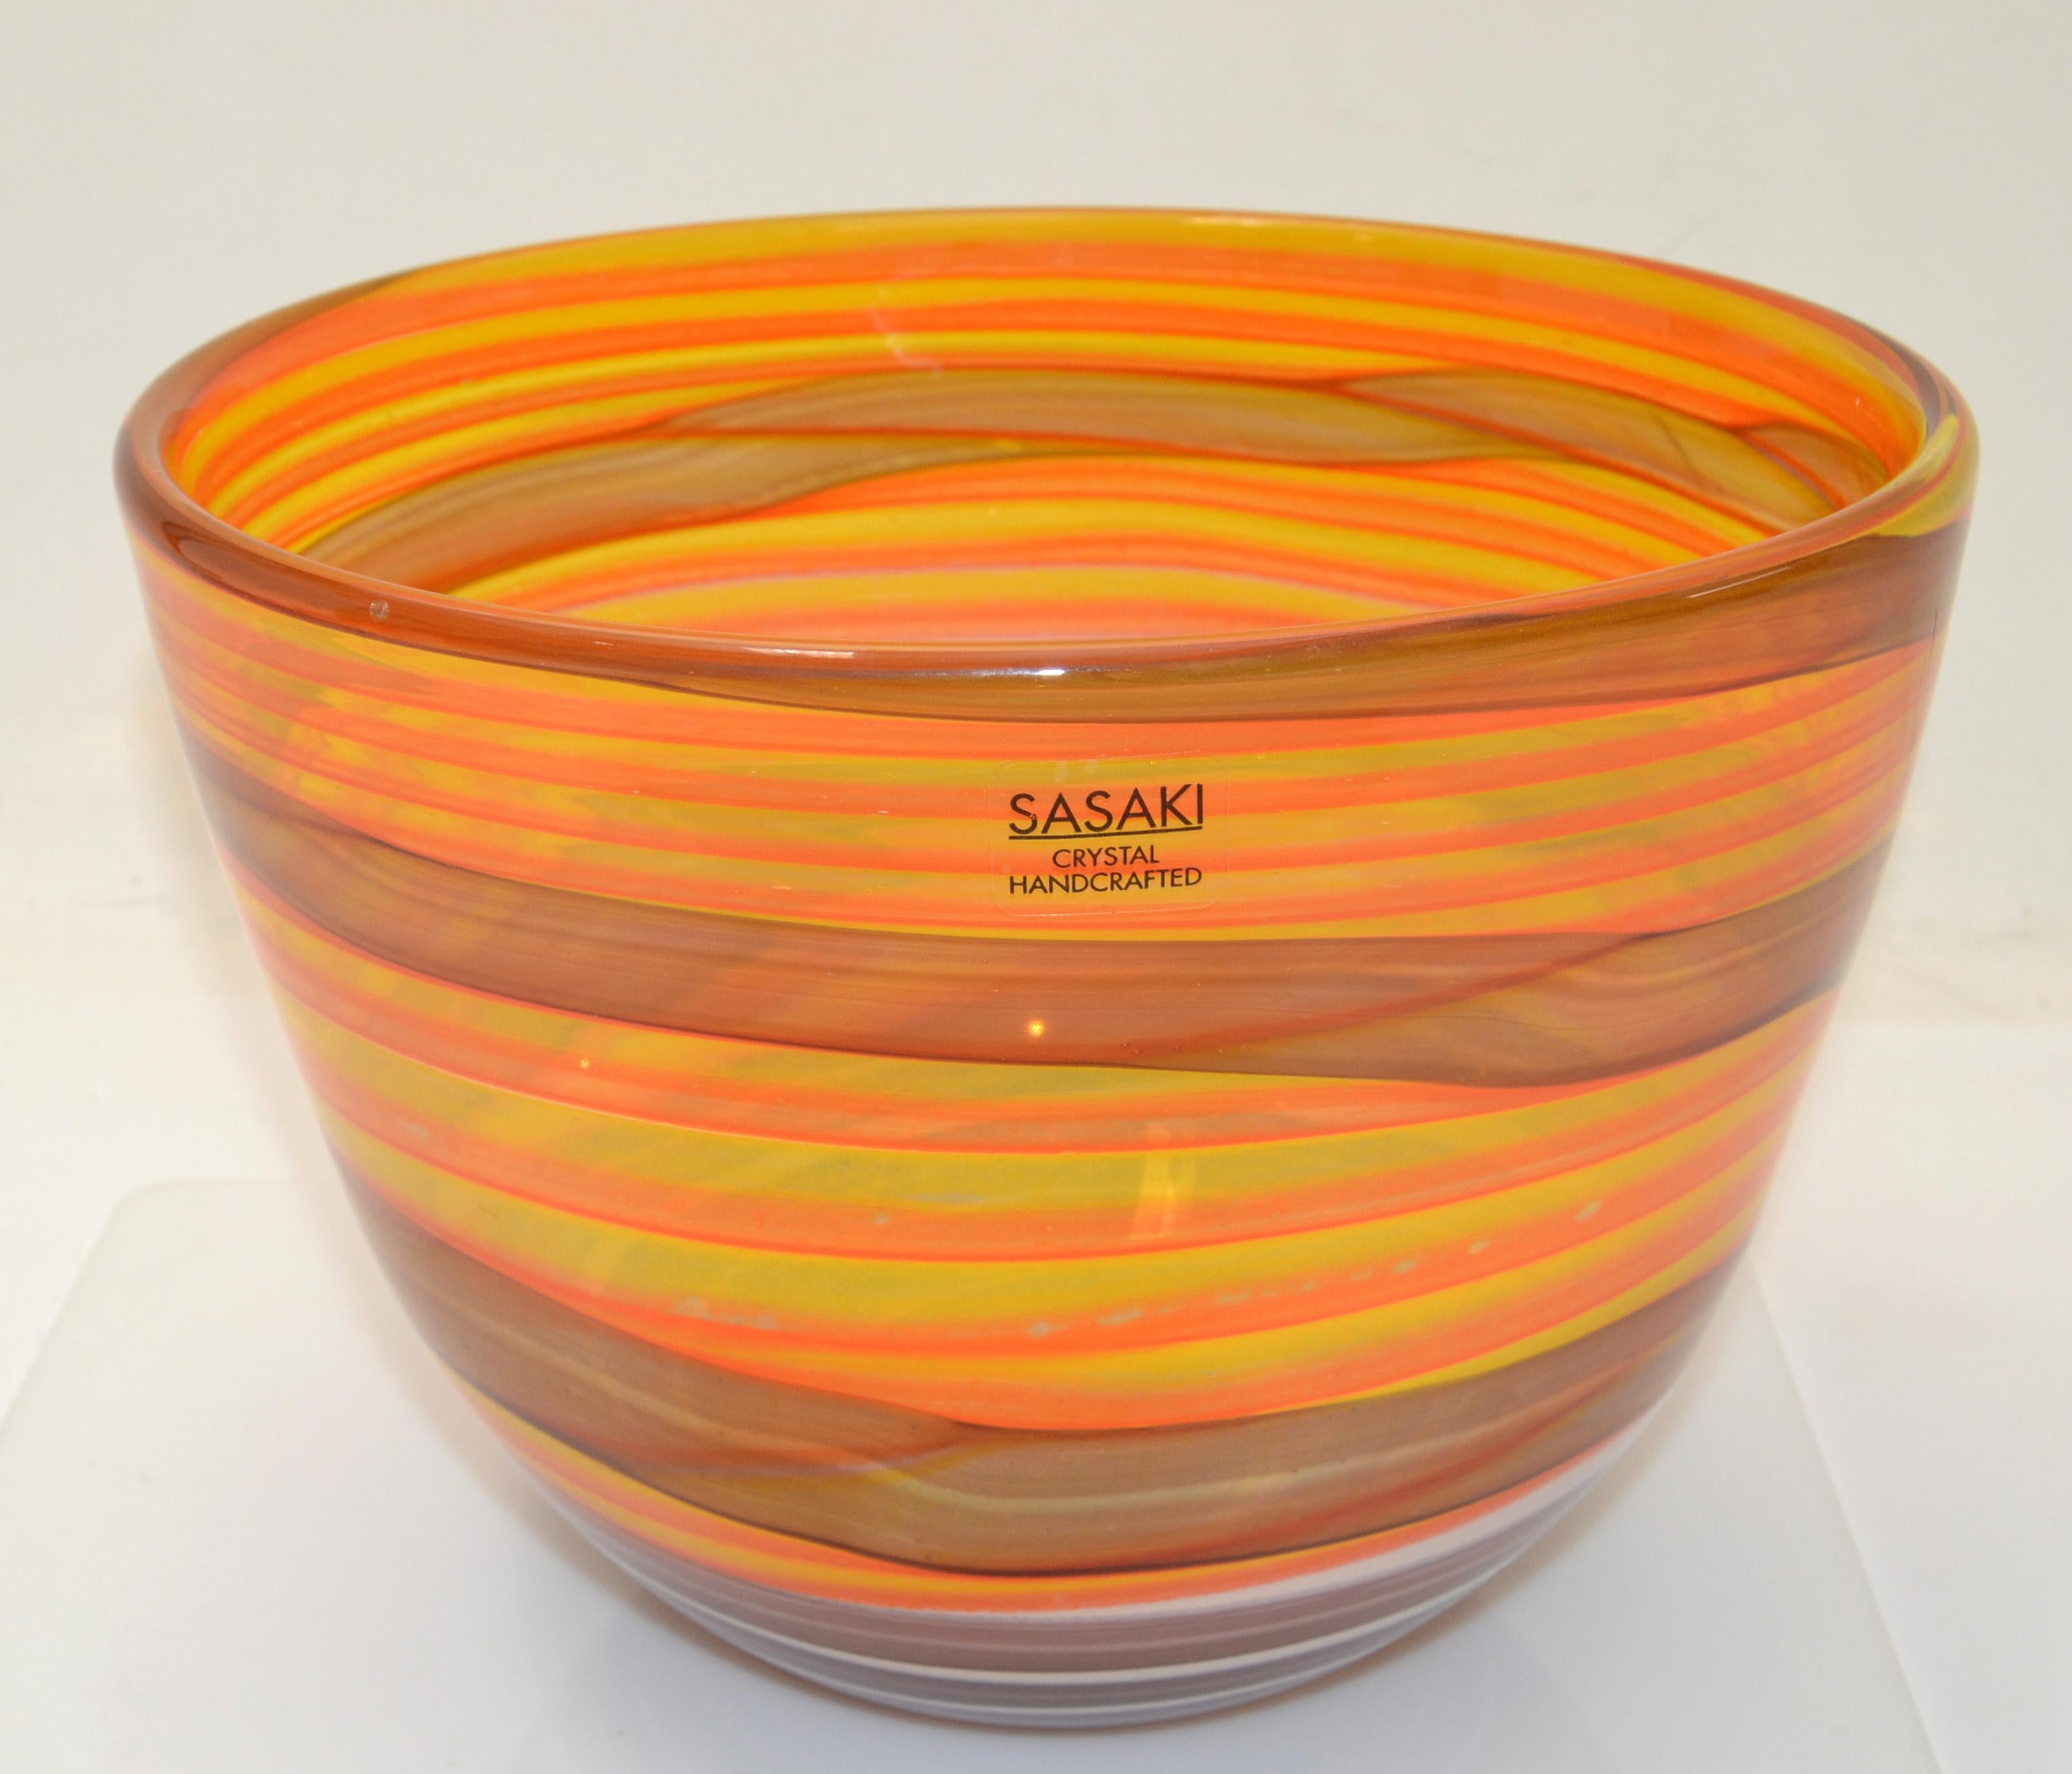 Signed Sasaki Sengai round lead crystal flower vase or decorative bowl in swirled hues of orange with white. 
Marked with Label. 
The bowl is very heavy.
 